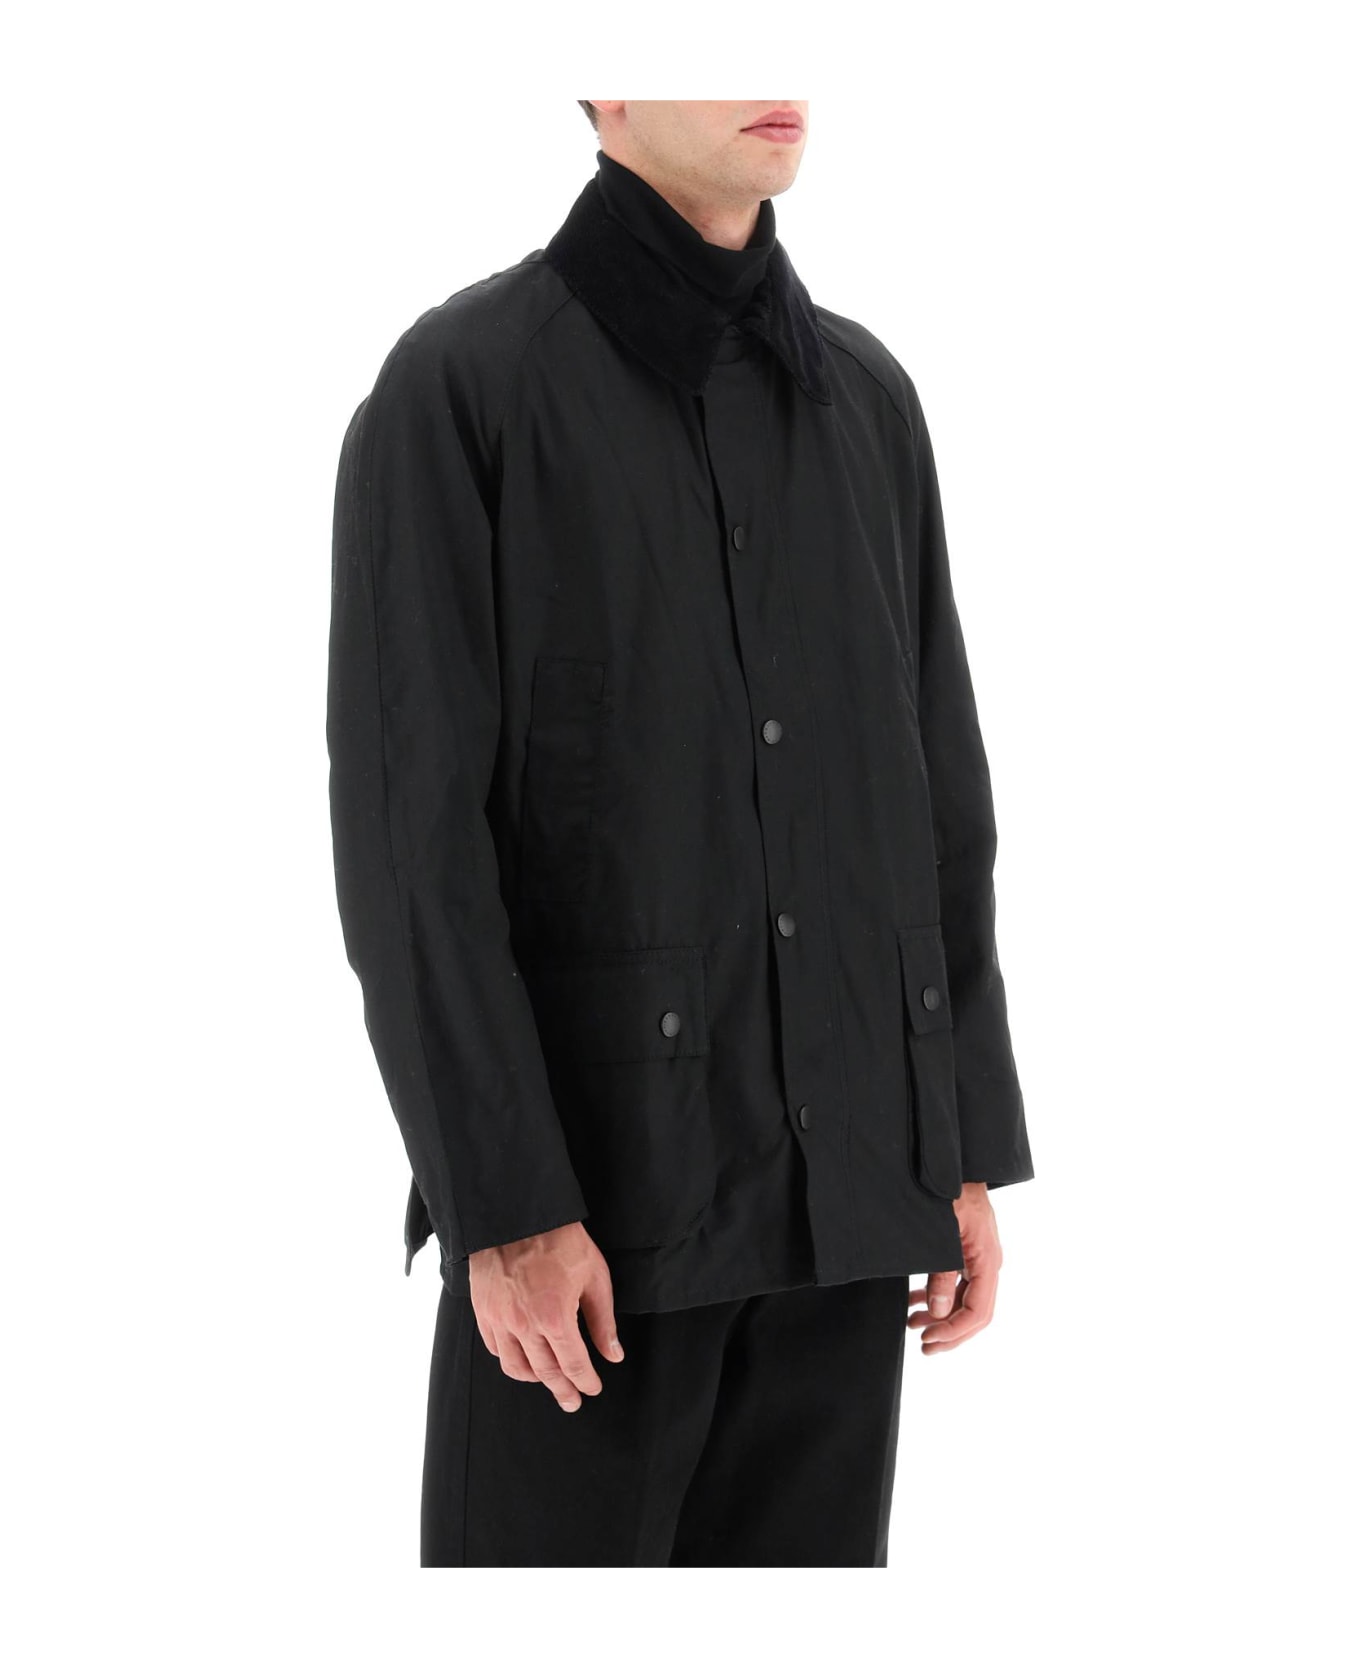 Barbour Ashby Waxed Jacket - BLACK CLASSIC (Black)